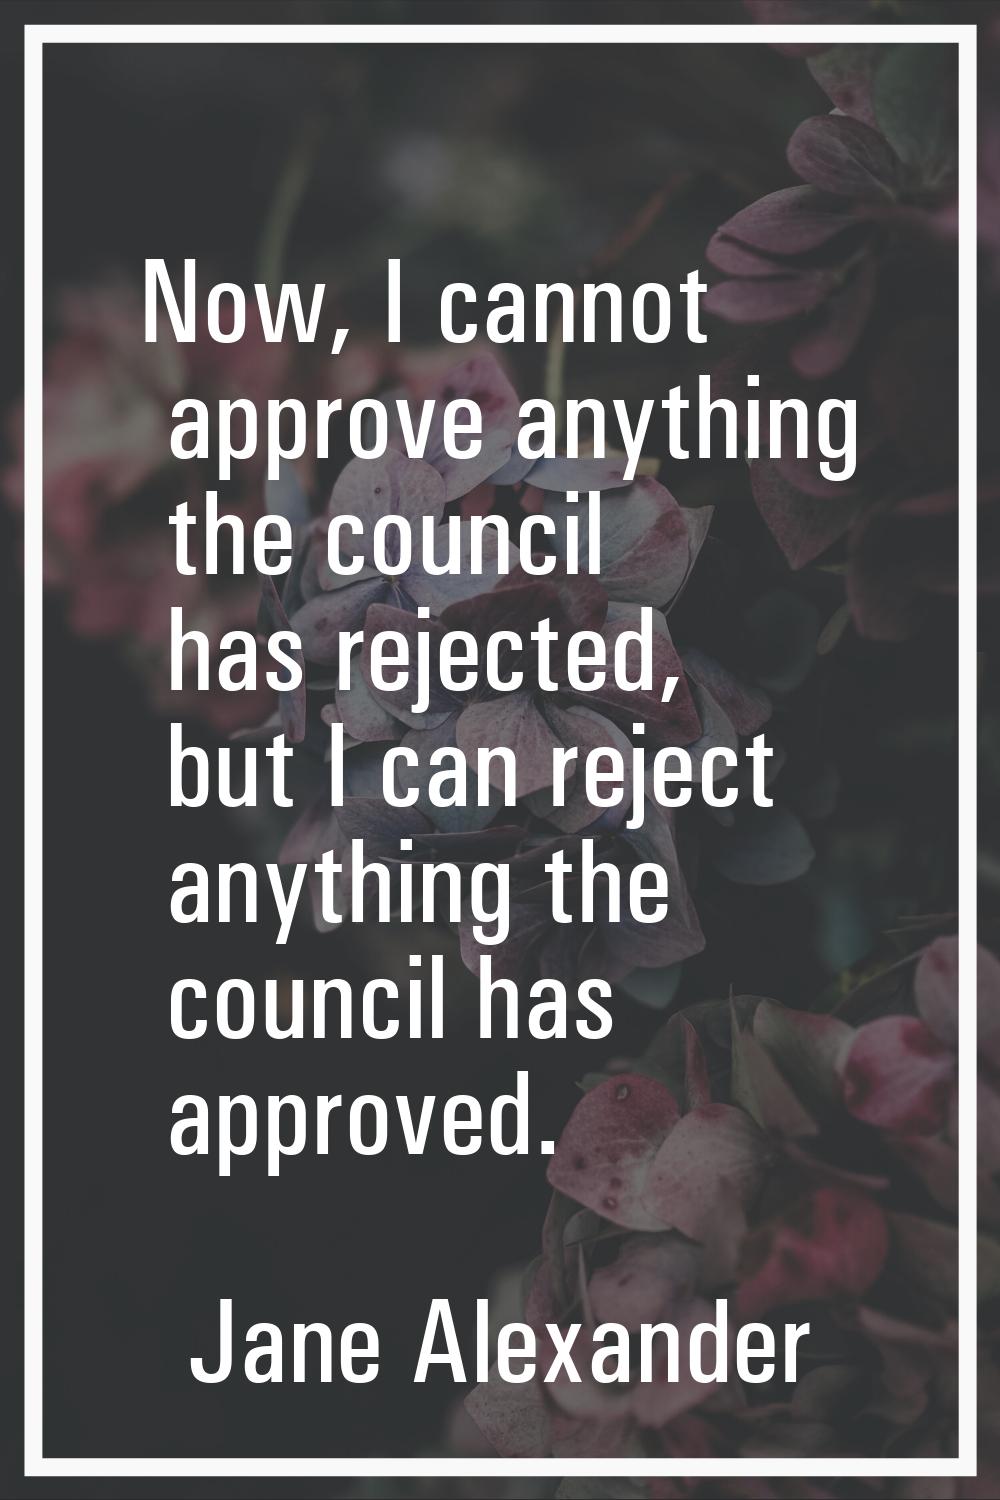 Now, I cannot approve anything the council has rejected, but I can reject anything the council has 